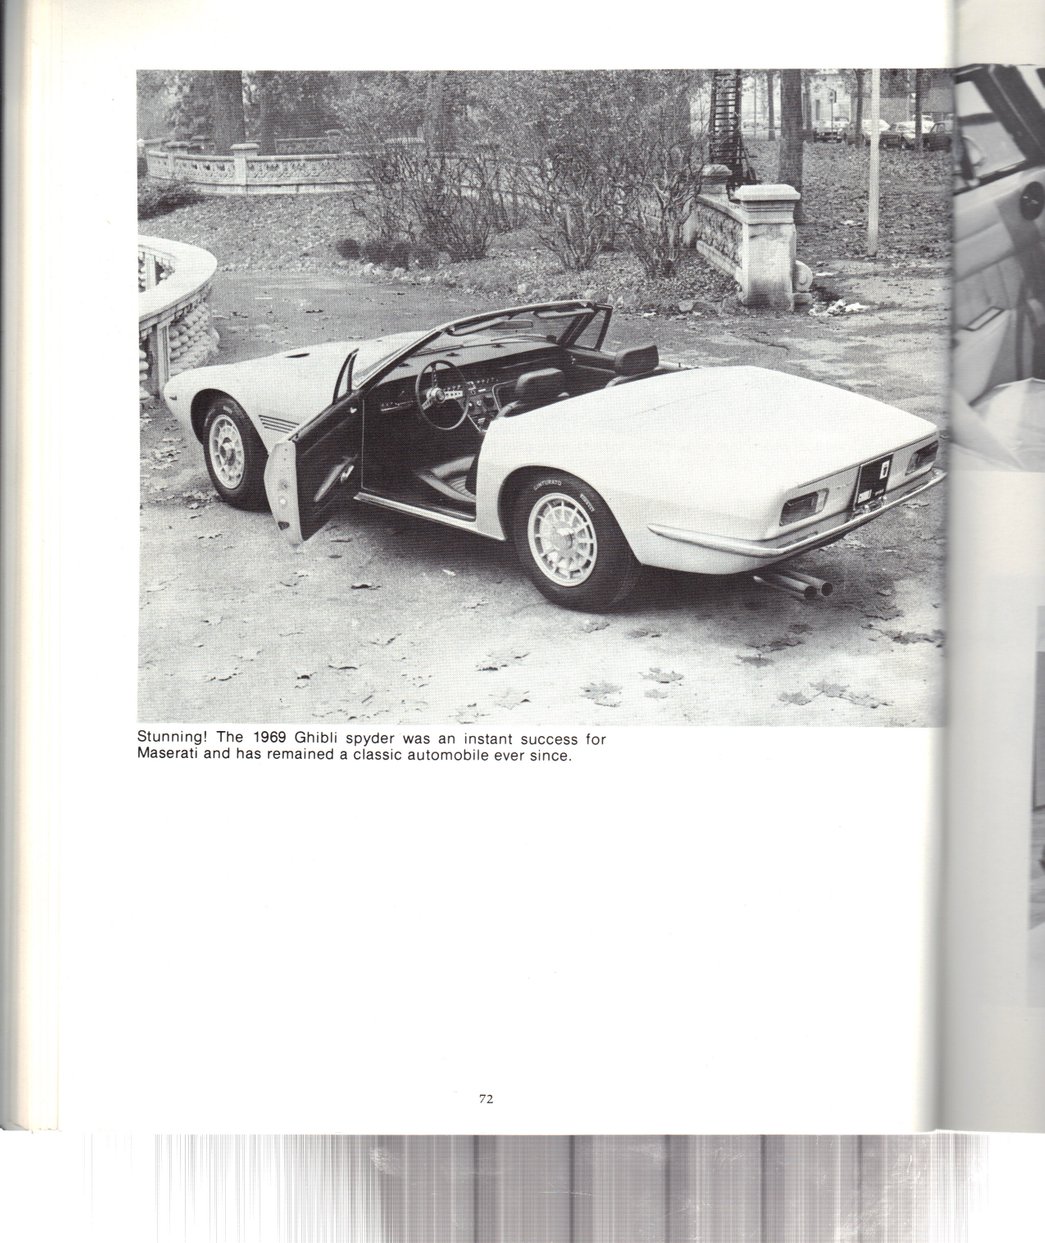 Copyright Illustrated Maserati Buyers Guide 1984. All rights reserved